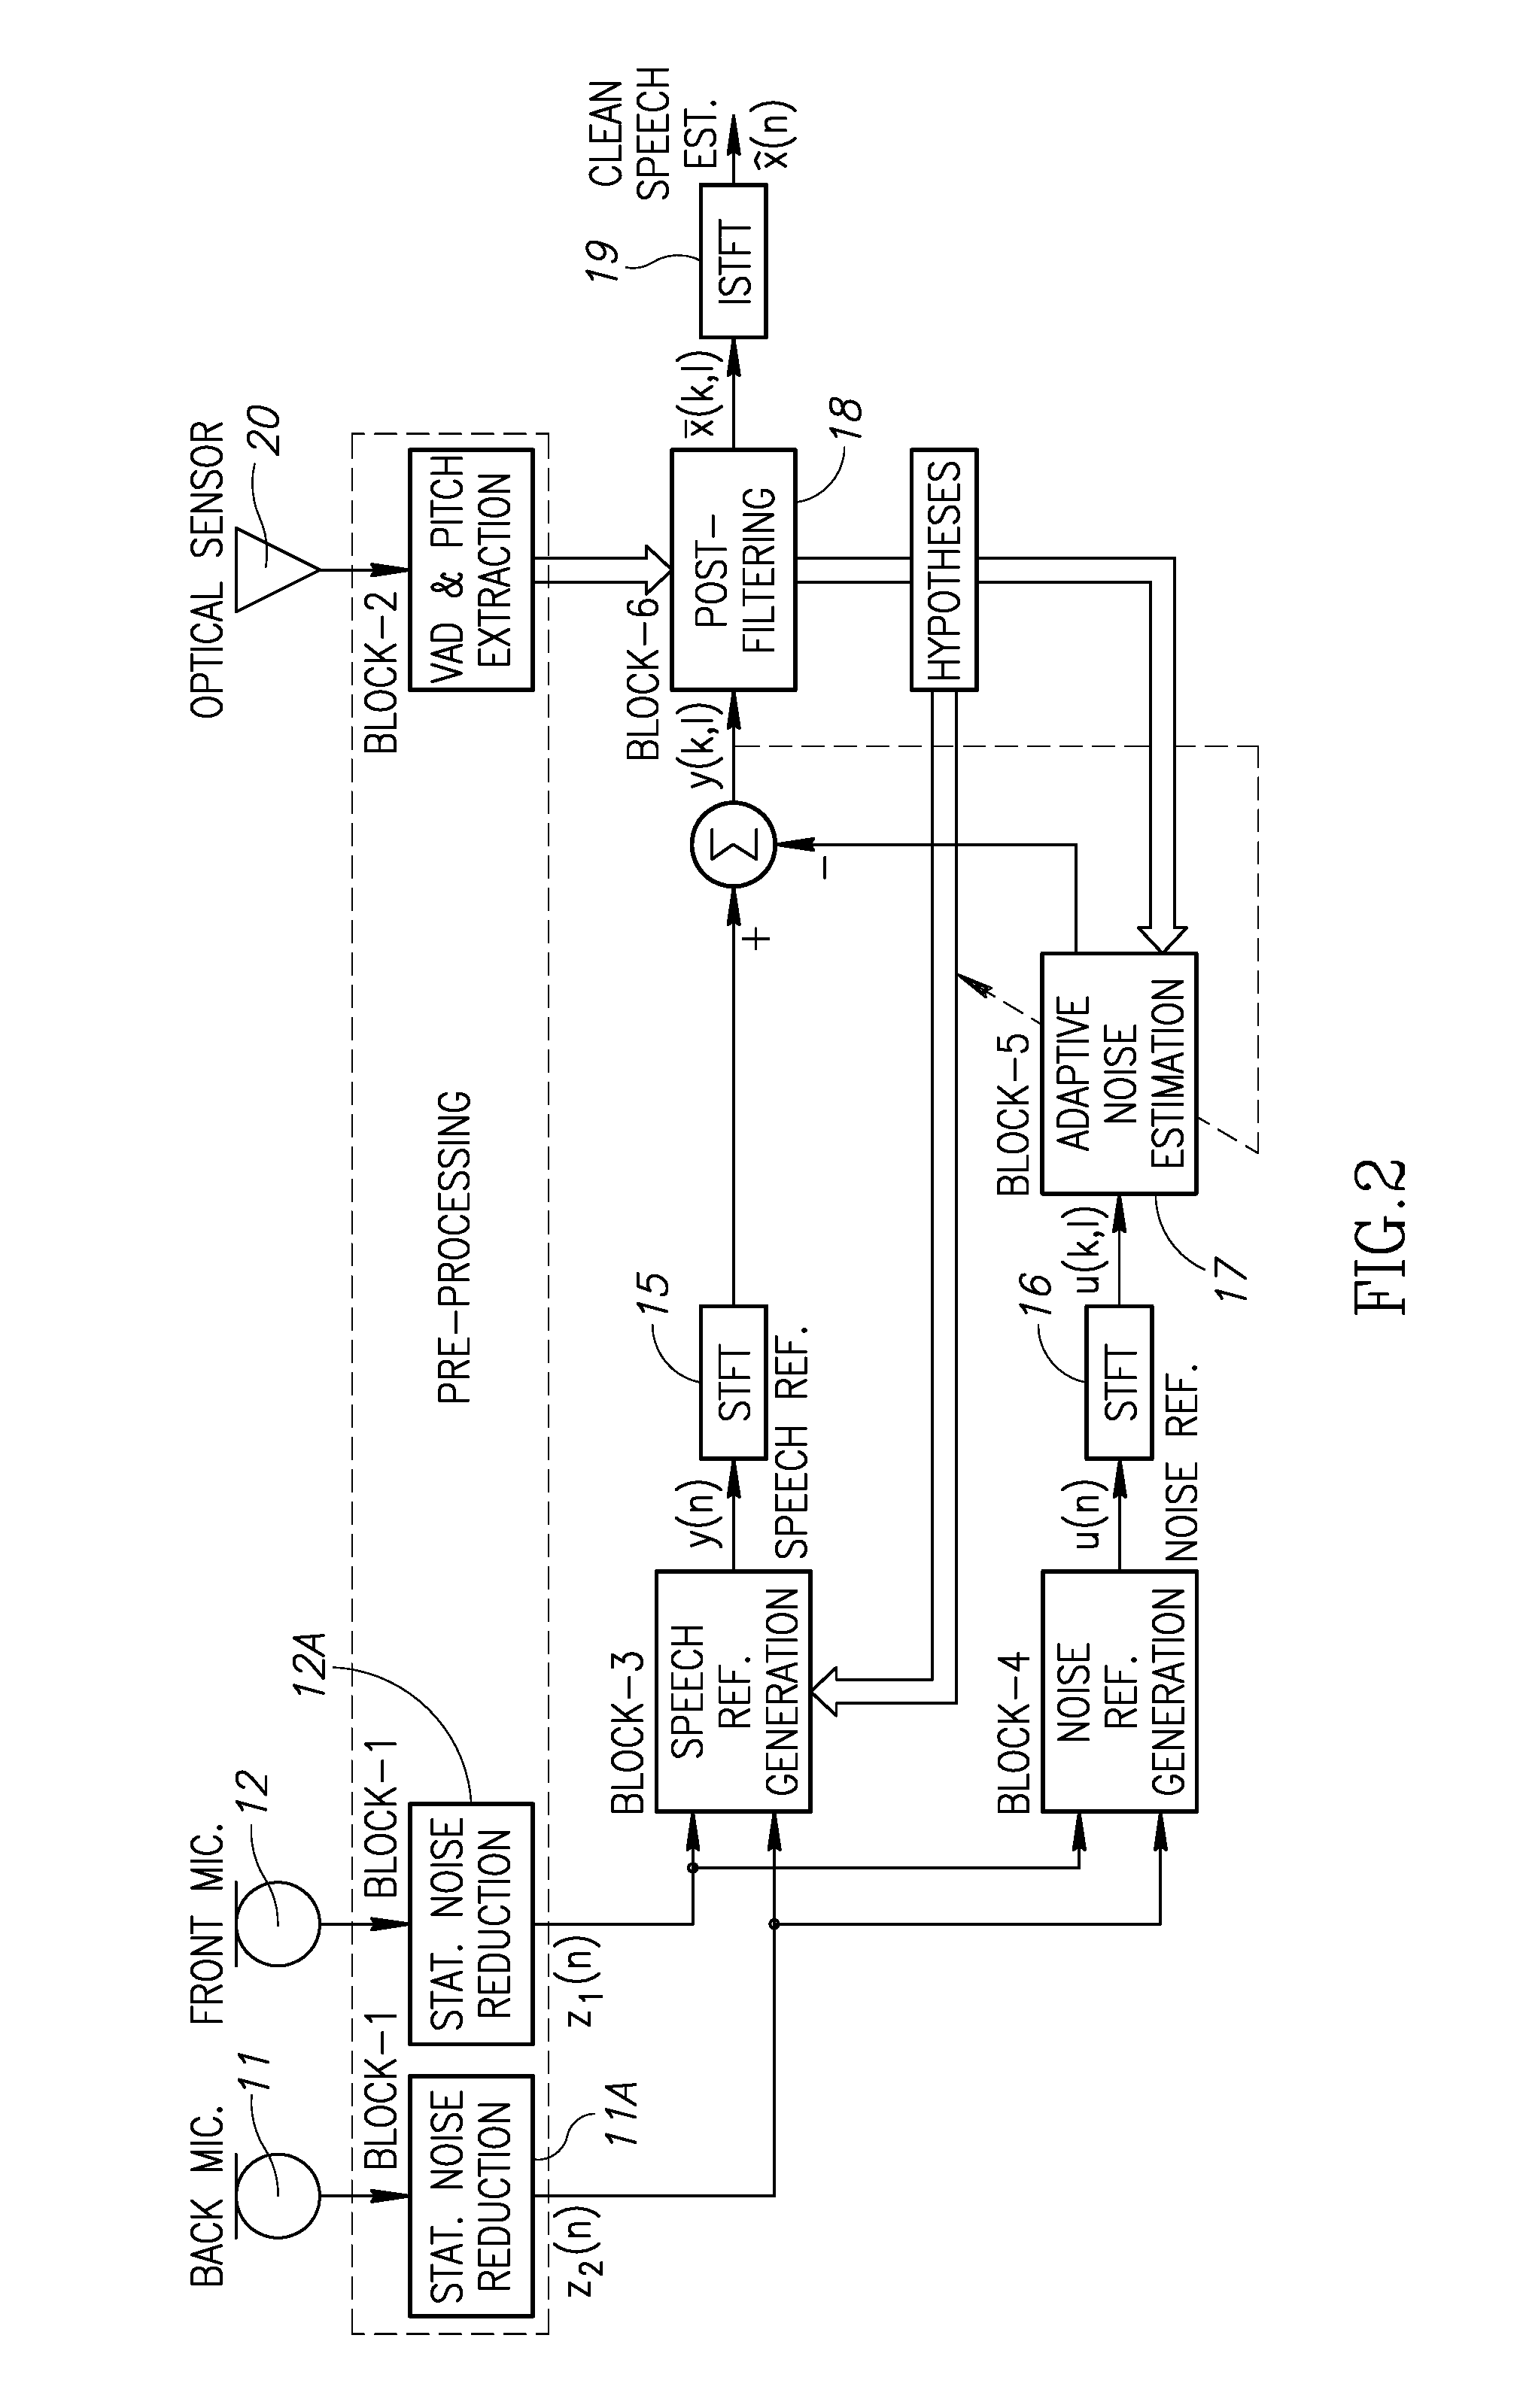 Method and system for noise reduction and speech enhancement